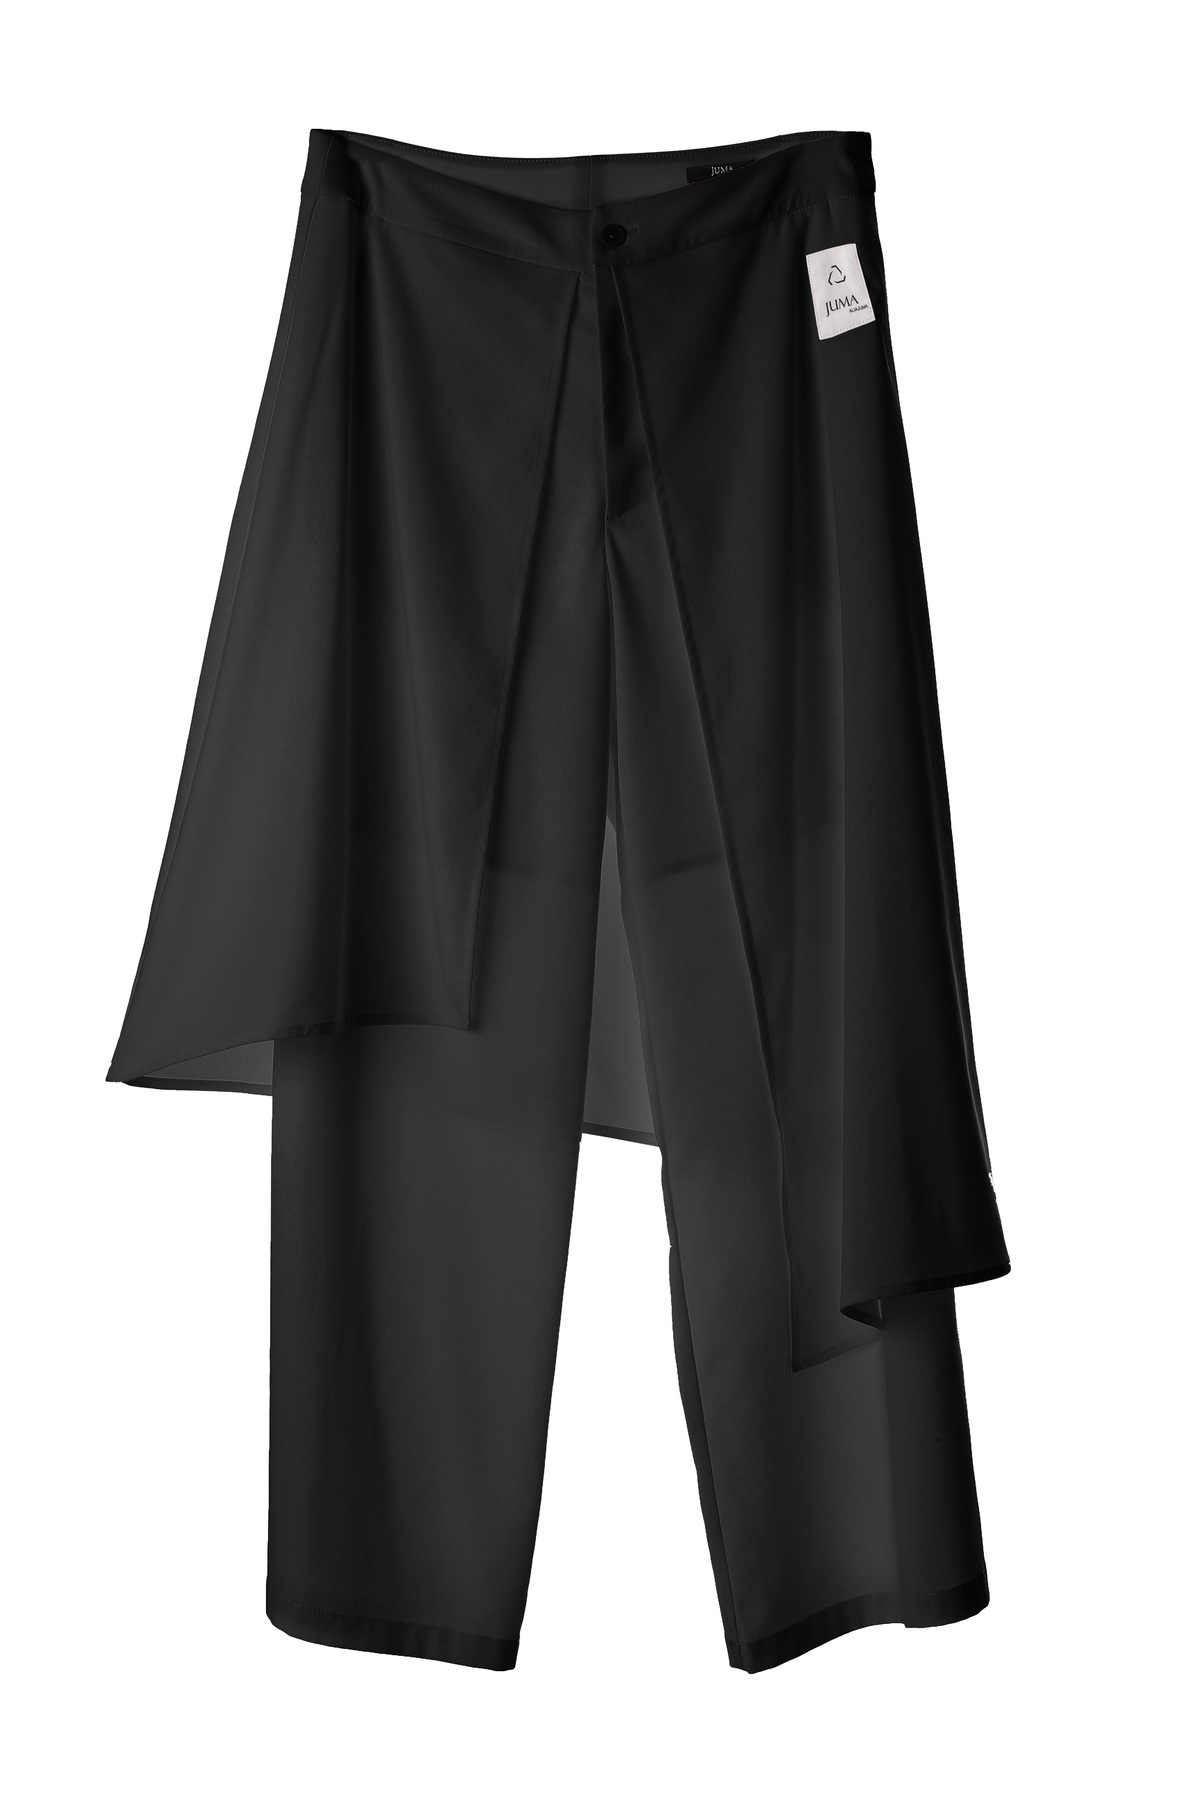 Duohan Zhang 裹身式前裤 - 10 个再生水瓶 - 黑色｜Duohan Zhang Wrap Front Pant - 10 Recycled Water Bottles - Black